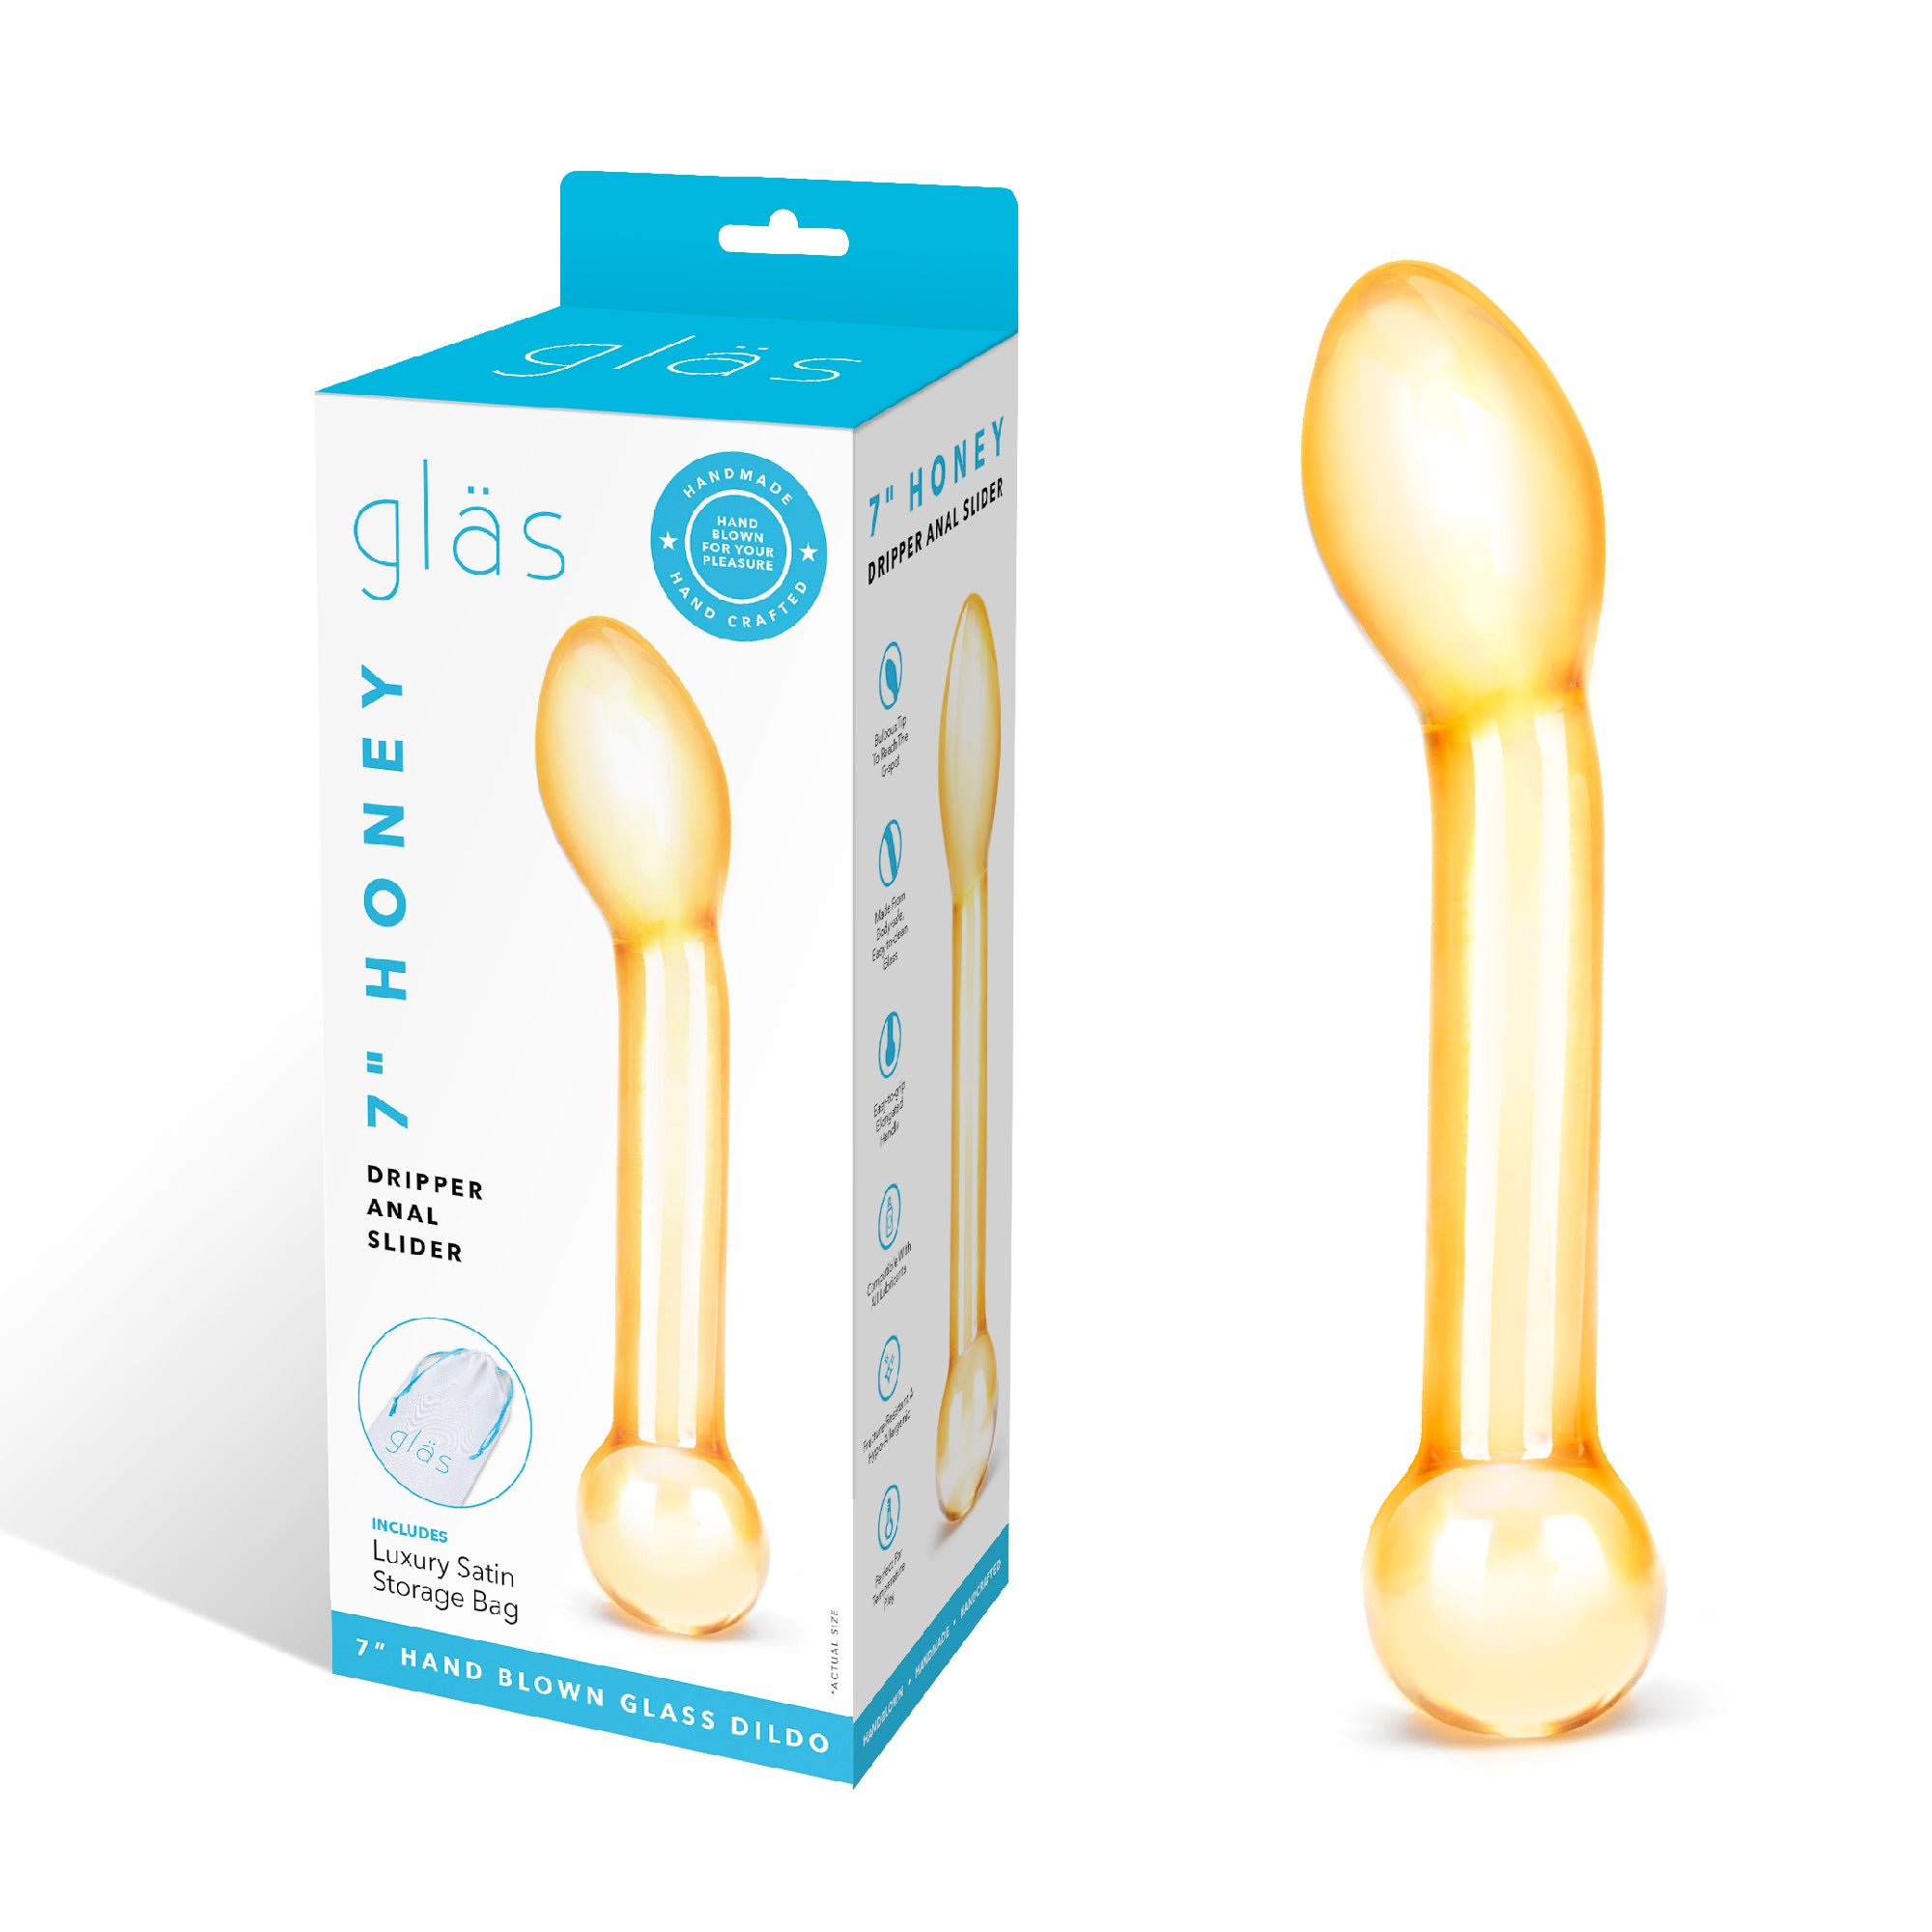 Packaging of the Gläs Honey Dripper Anal Slider Glass Anal Toy